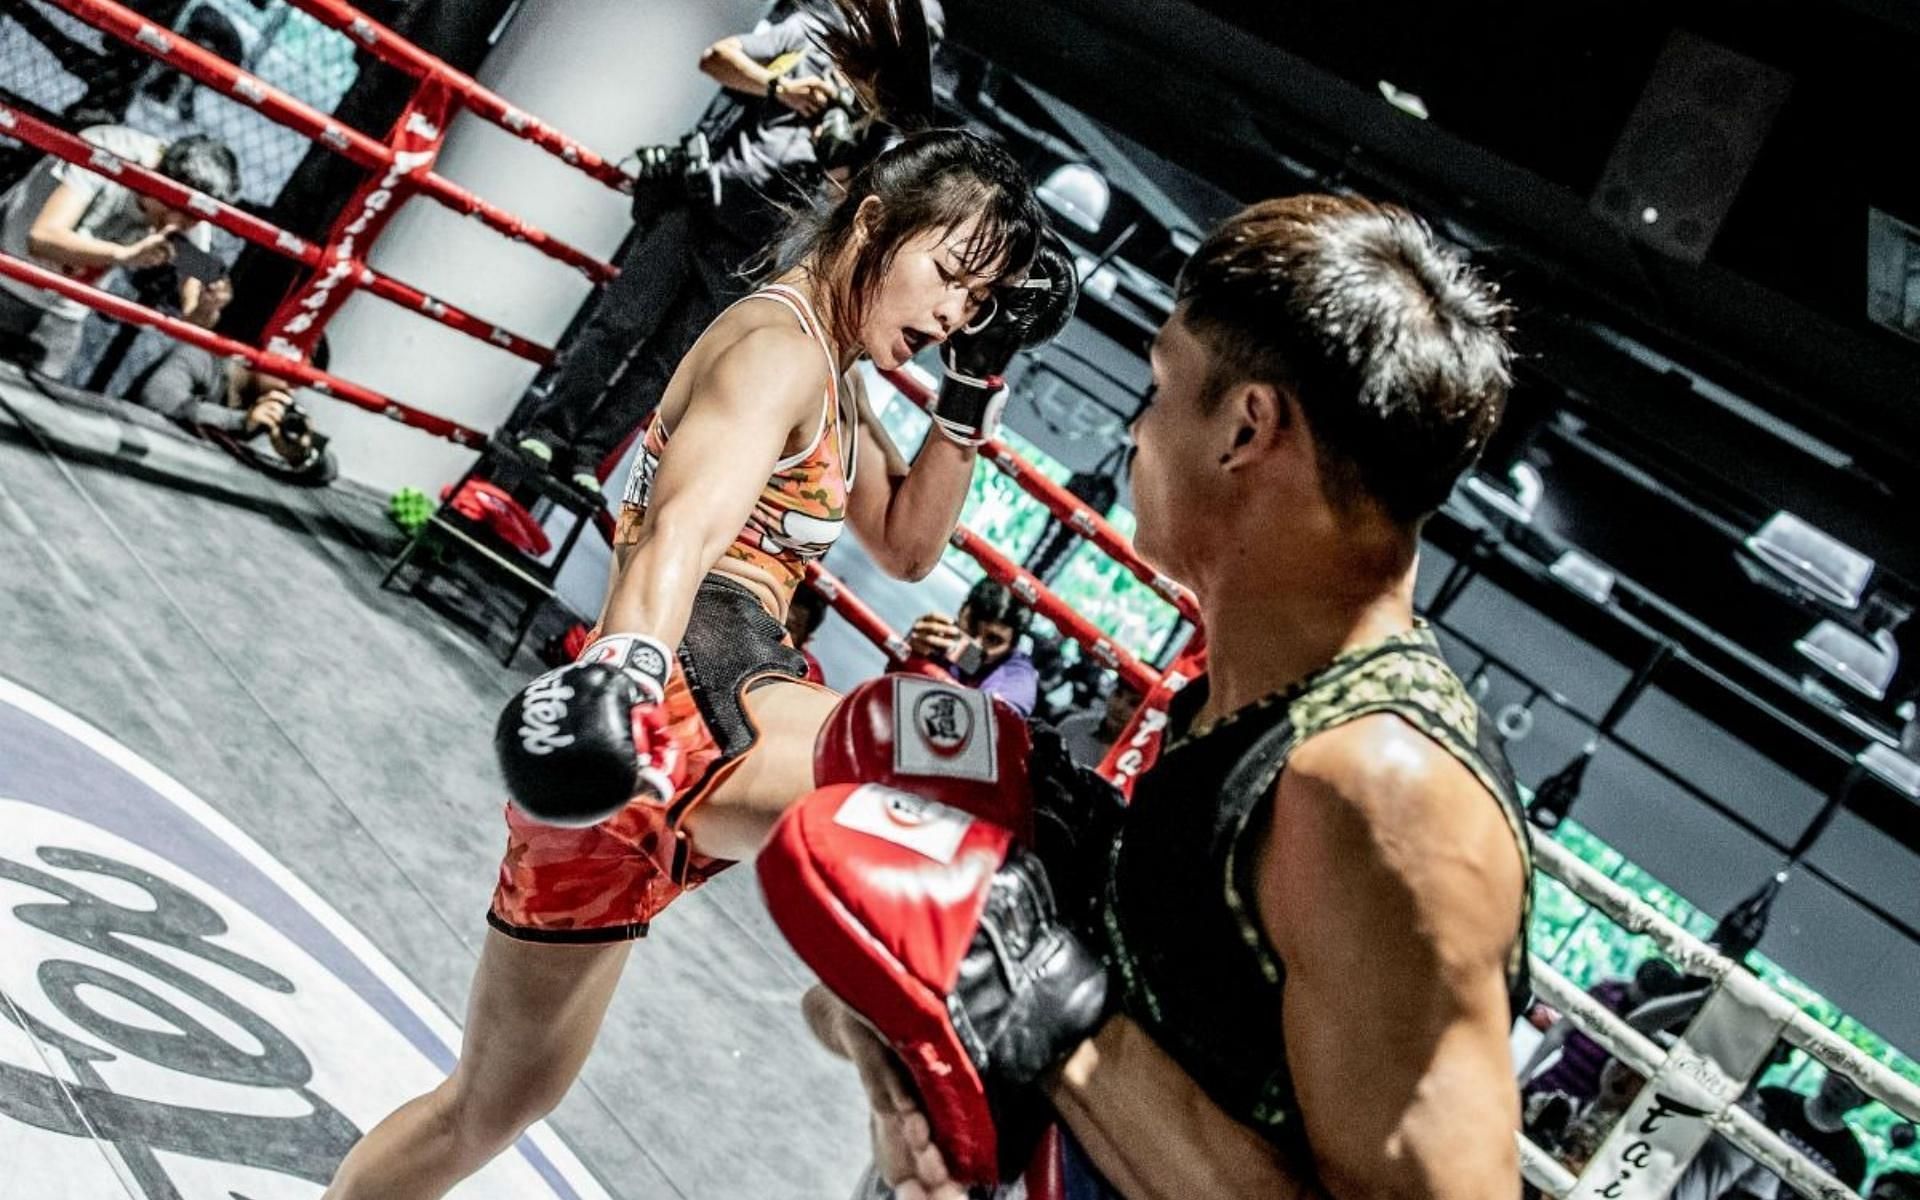 Stamp Fairtex is sharpening her weapons ahead of her main event title bout at ONE X. (Image courtesy of ONE Championship)